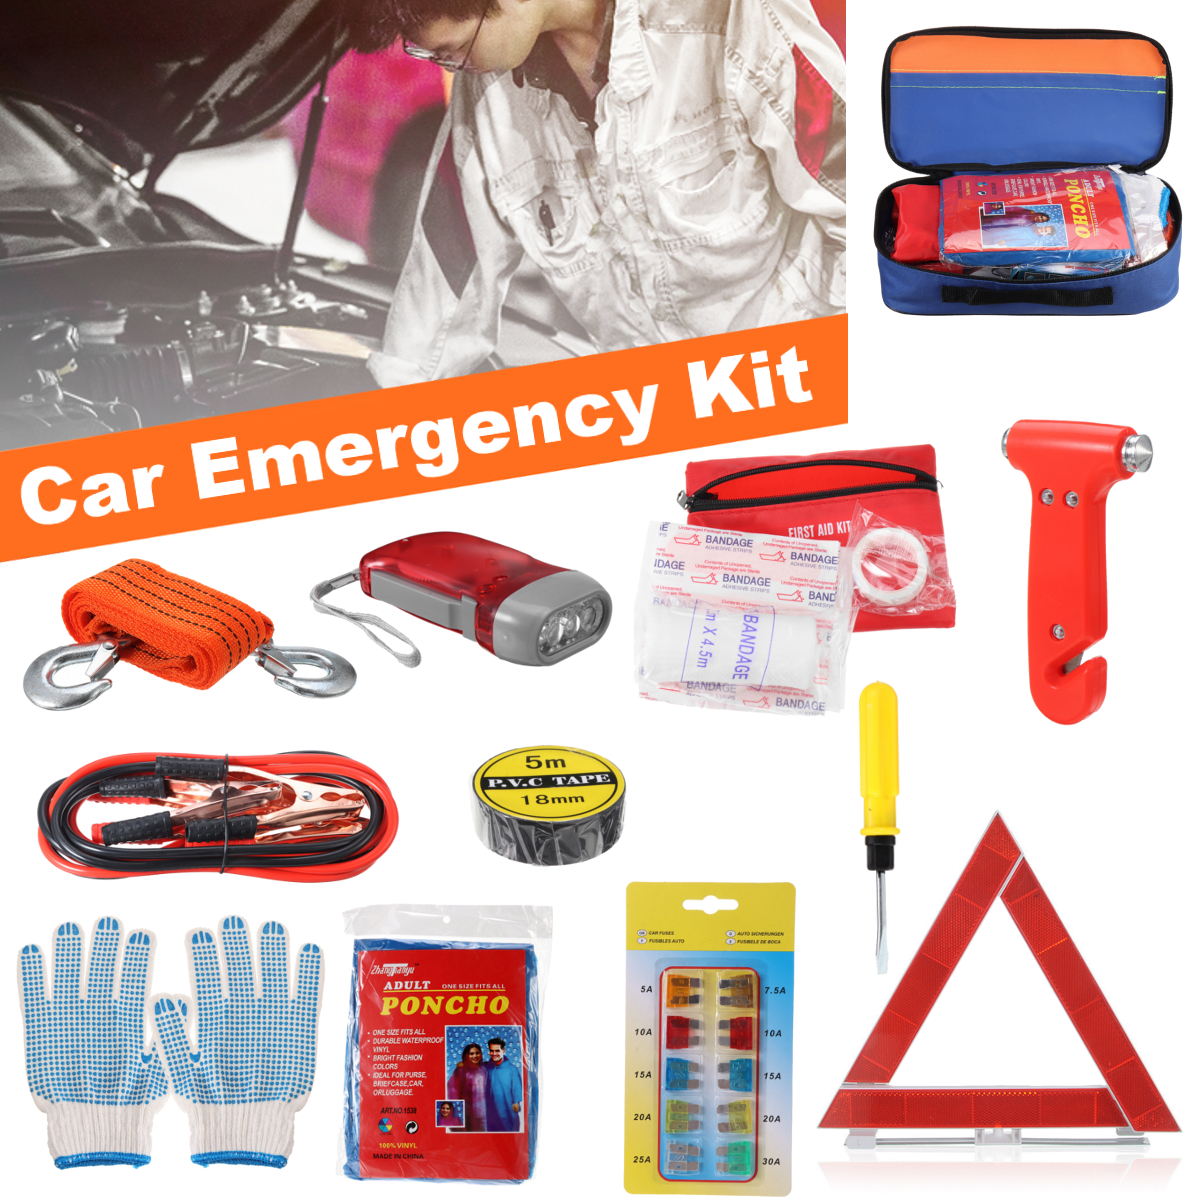 36PCS-Emergency-Kit-Car-Tool-Bag-Warning-Triangle-Flashlight-Safety-Hammer-First-Aid-Kit-Outdoor-Tra-1844804-1